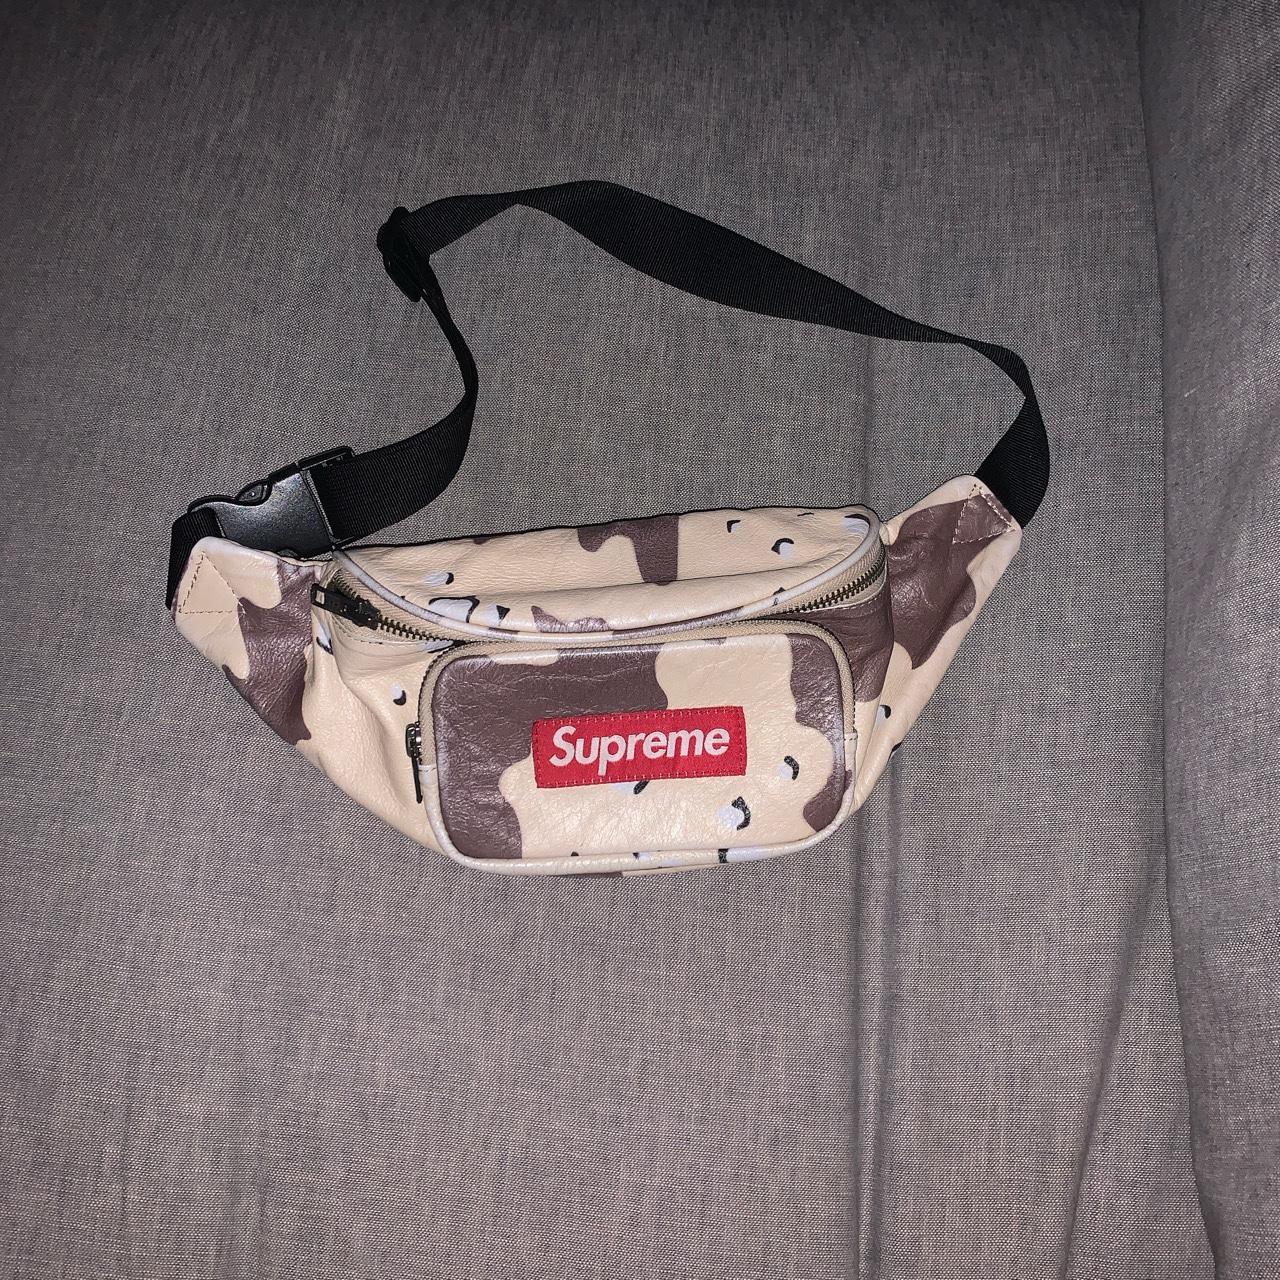 SUPREME DESERT CAMO FANNY PACK - US ONLY